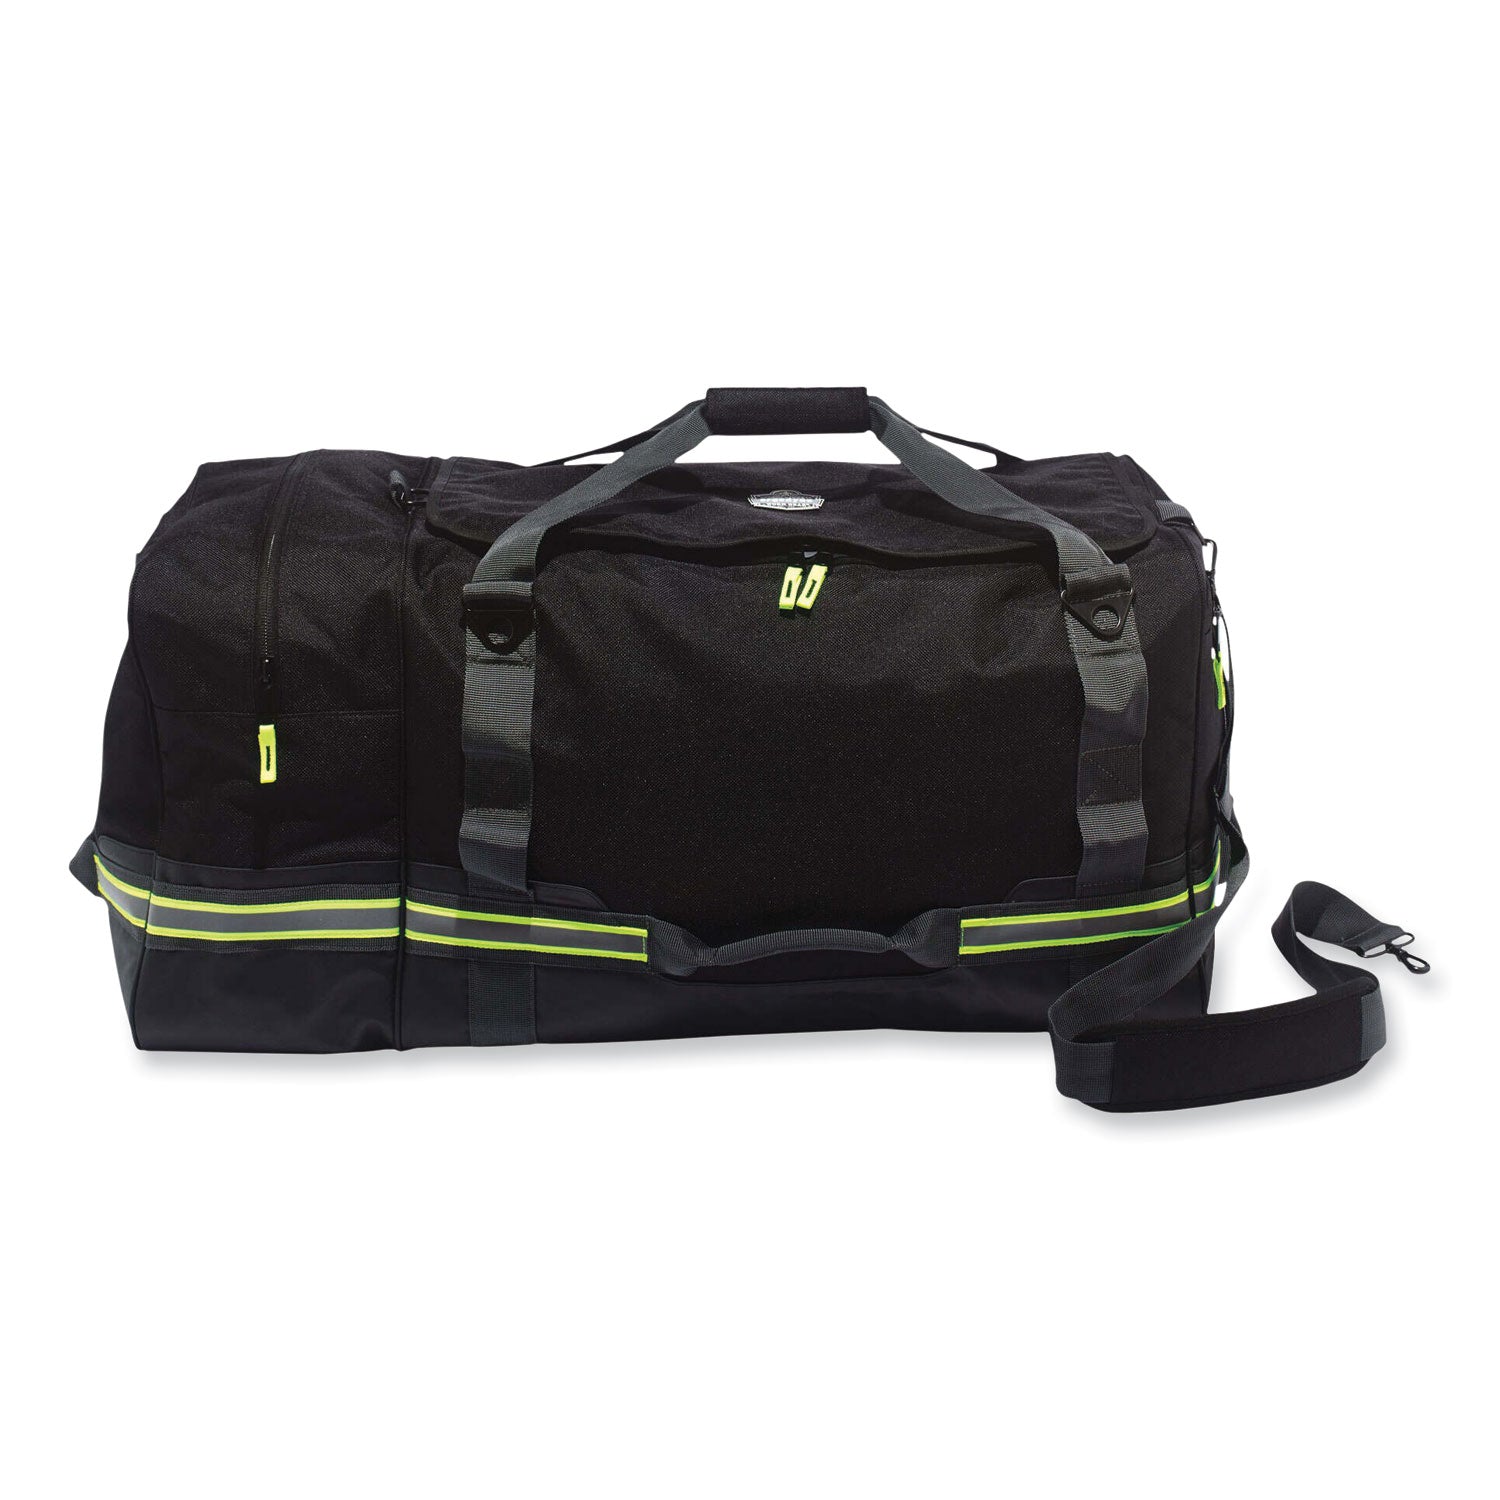 arsenal-5008-fire-+-safety-gear-bag-16-x-31-x-155-black-ships-in-1-3-business-days_ego13009 - 3